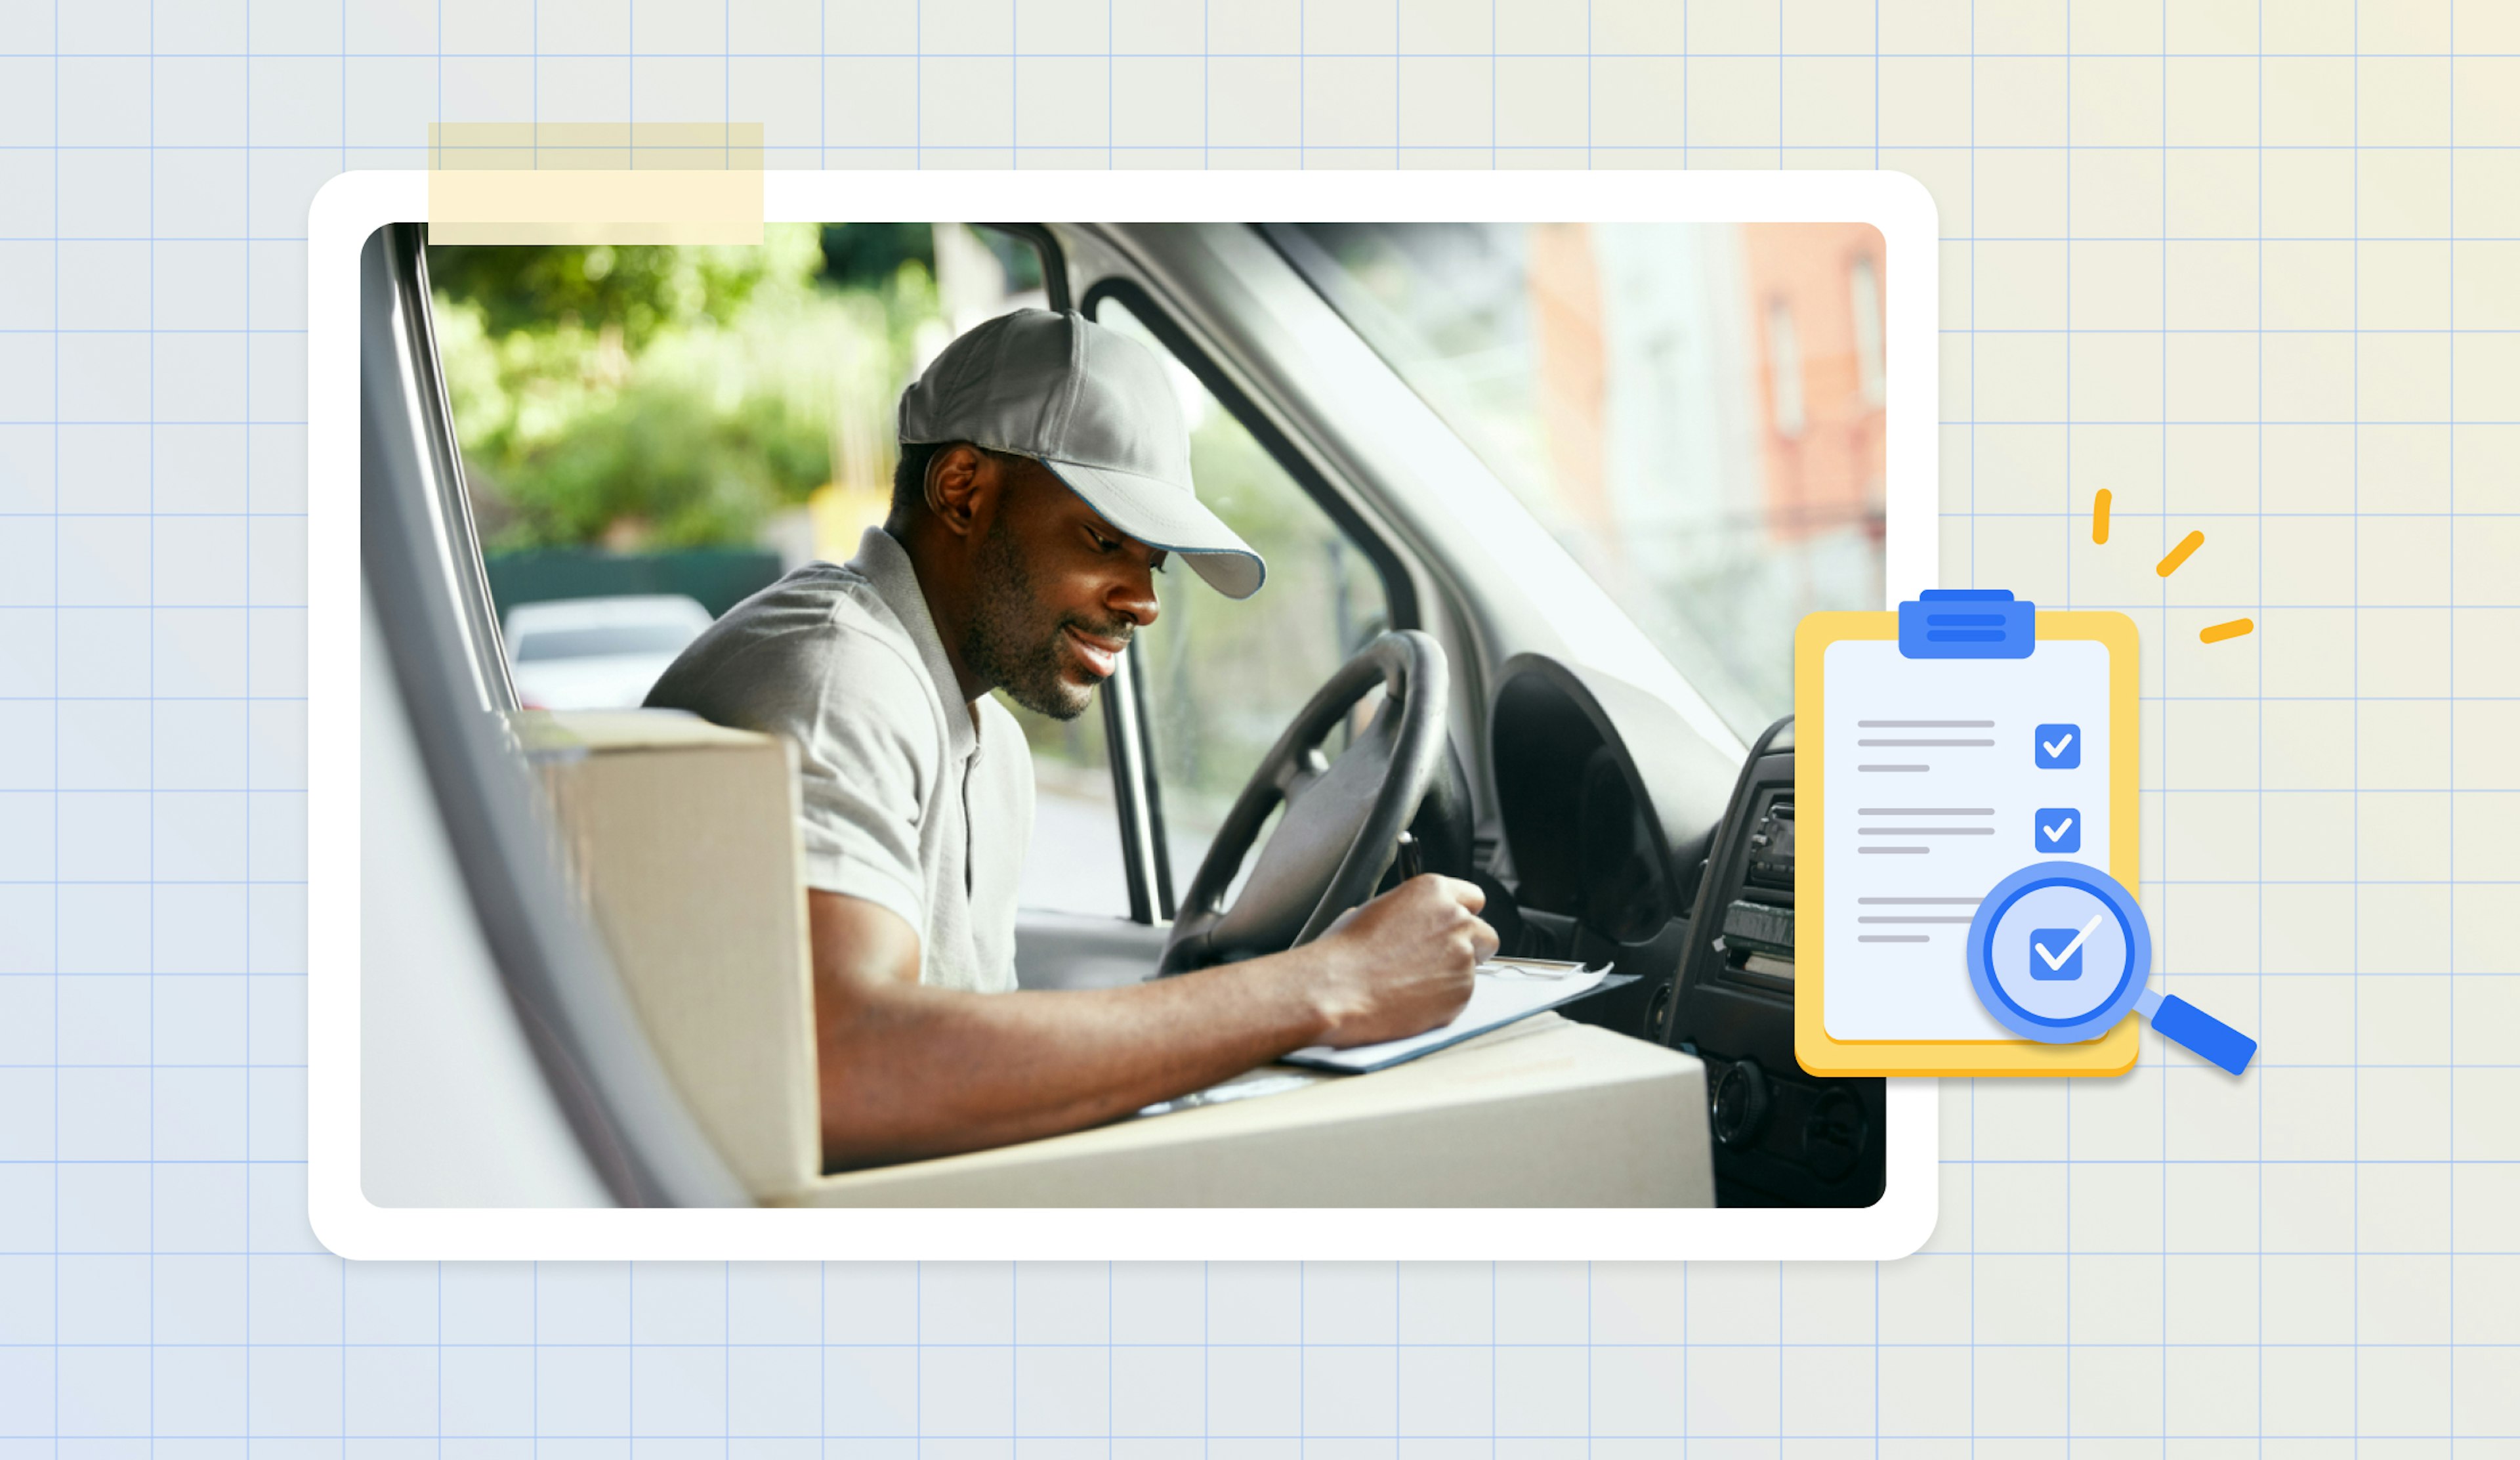 How to get courier contracts. Upper body of a courier driver in a vehicle writing a note whilst leaning on a white box.